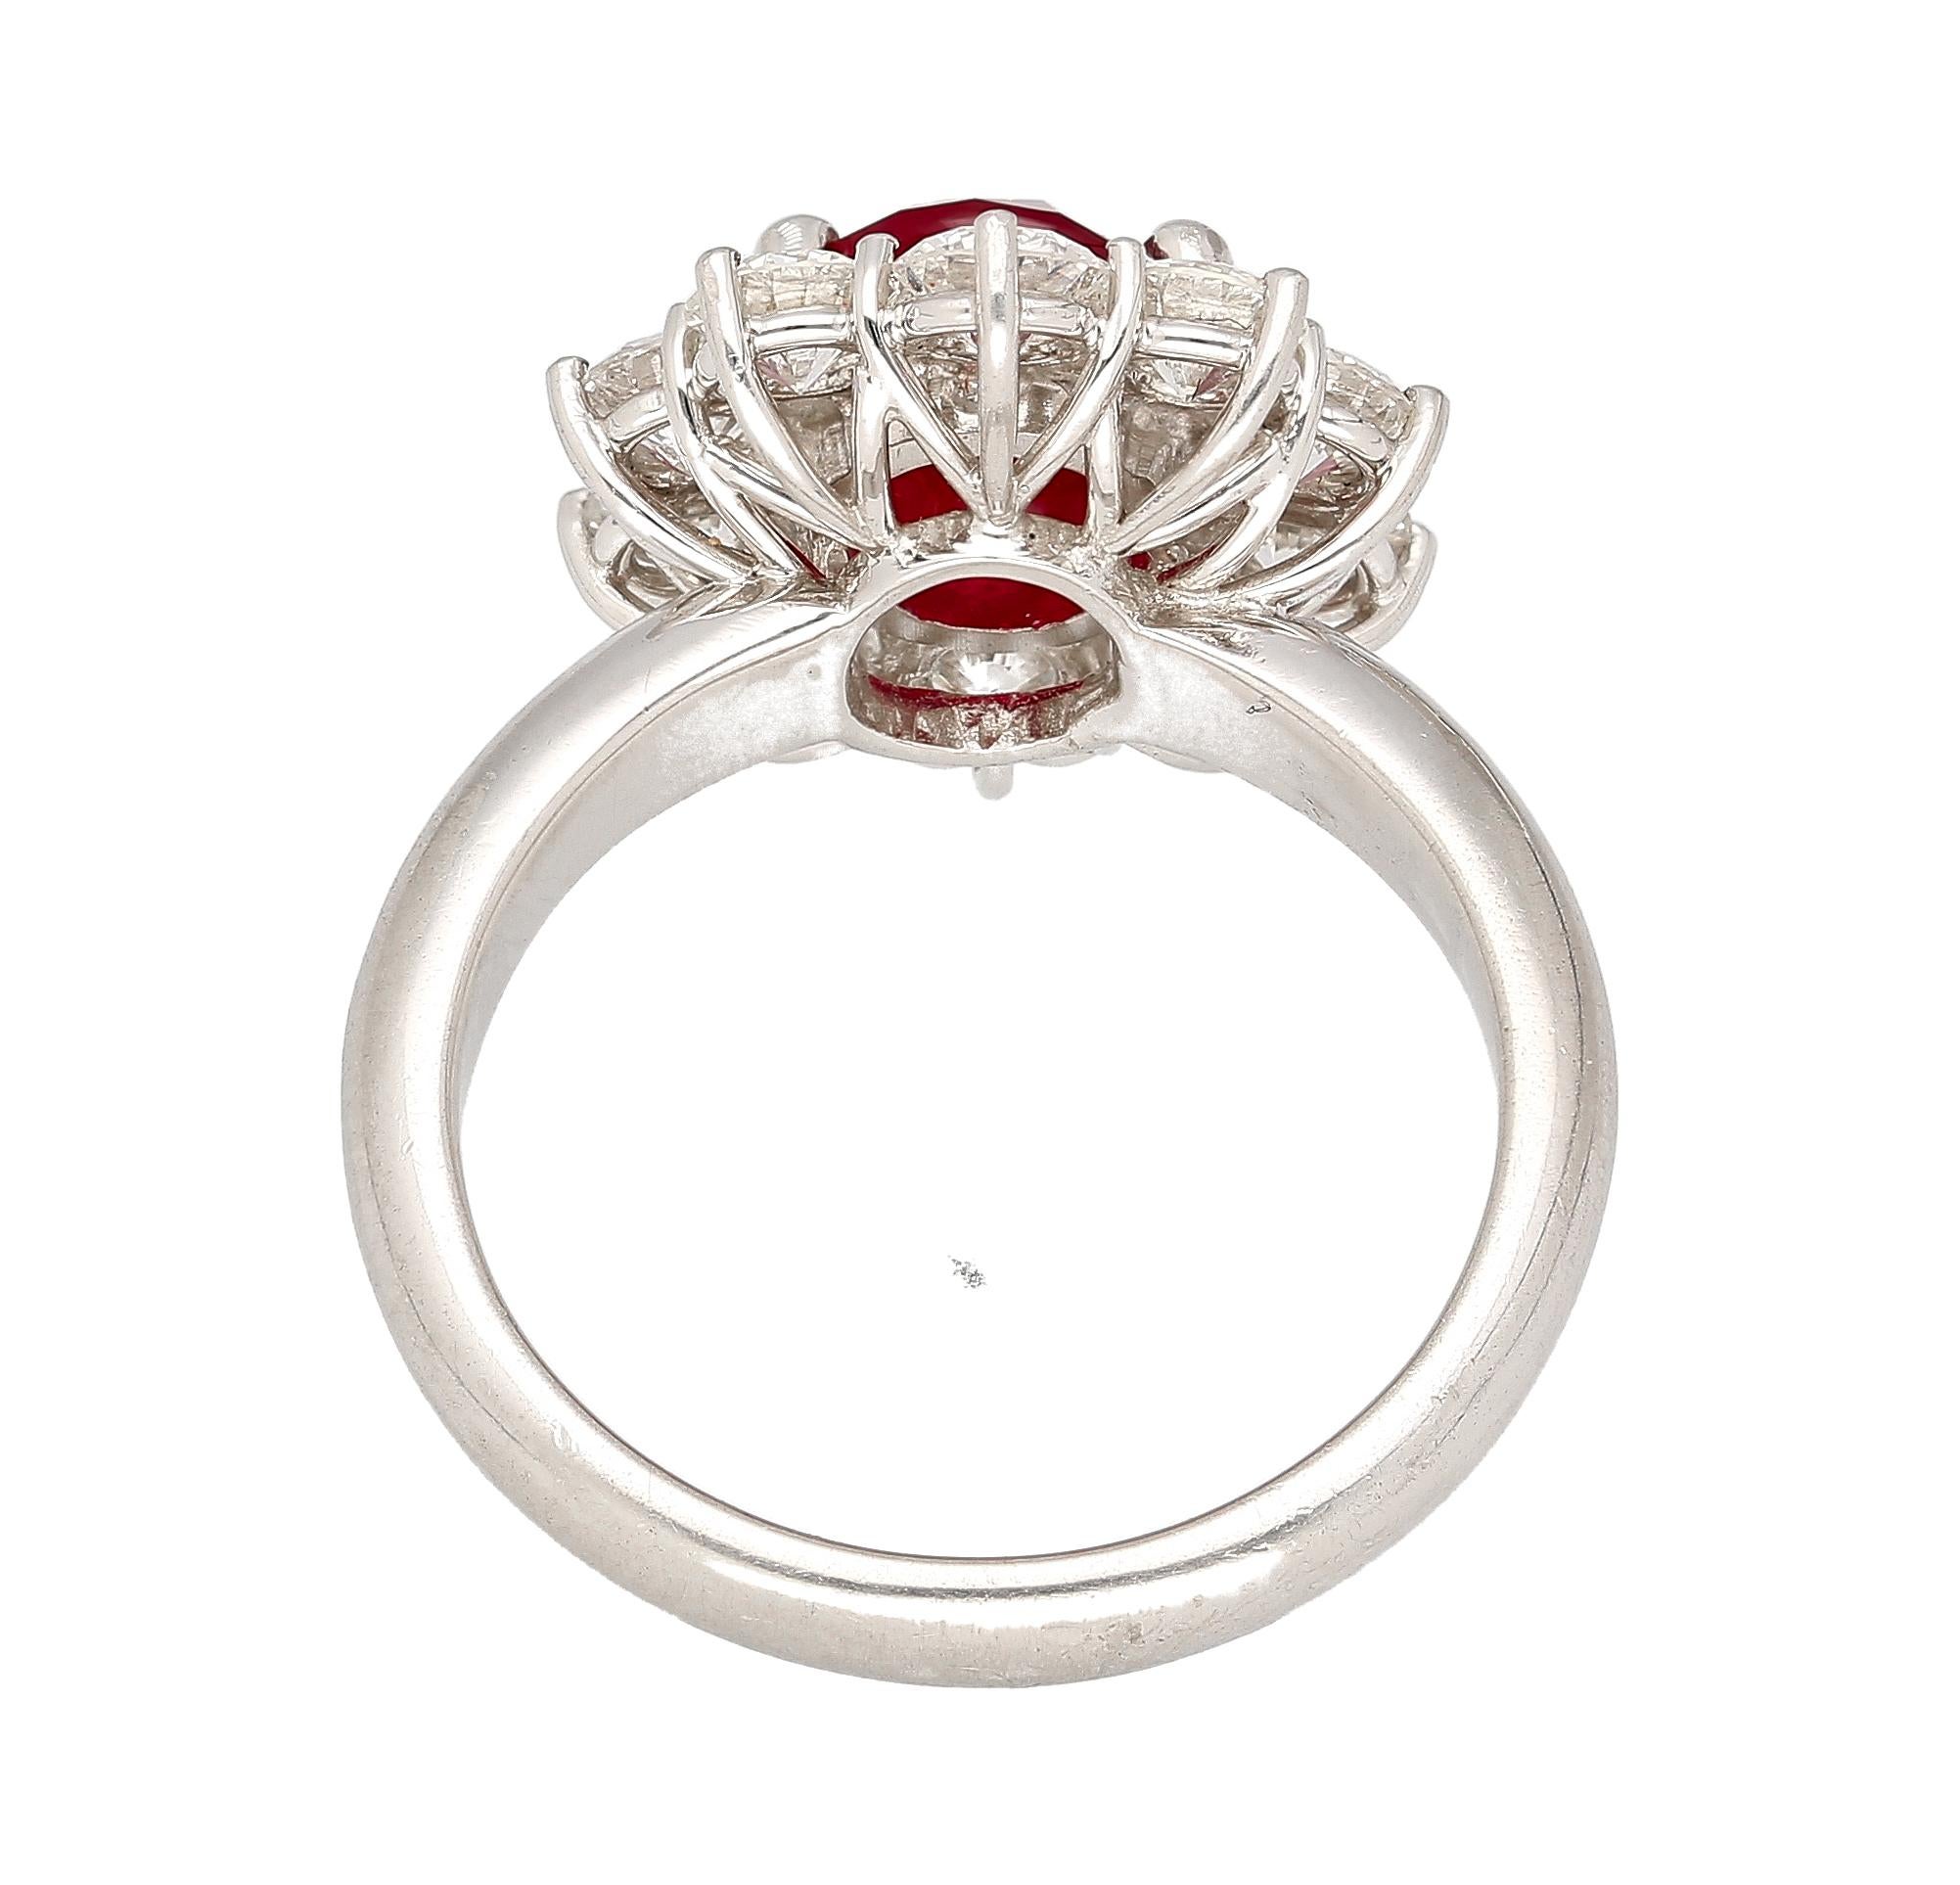 Modern 3 Carat Vivid Red Pigeons Blood Burma Ruby Ring with Diamonds in Platinum & Gold For Sale